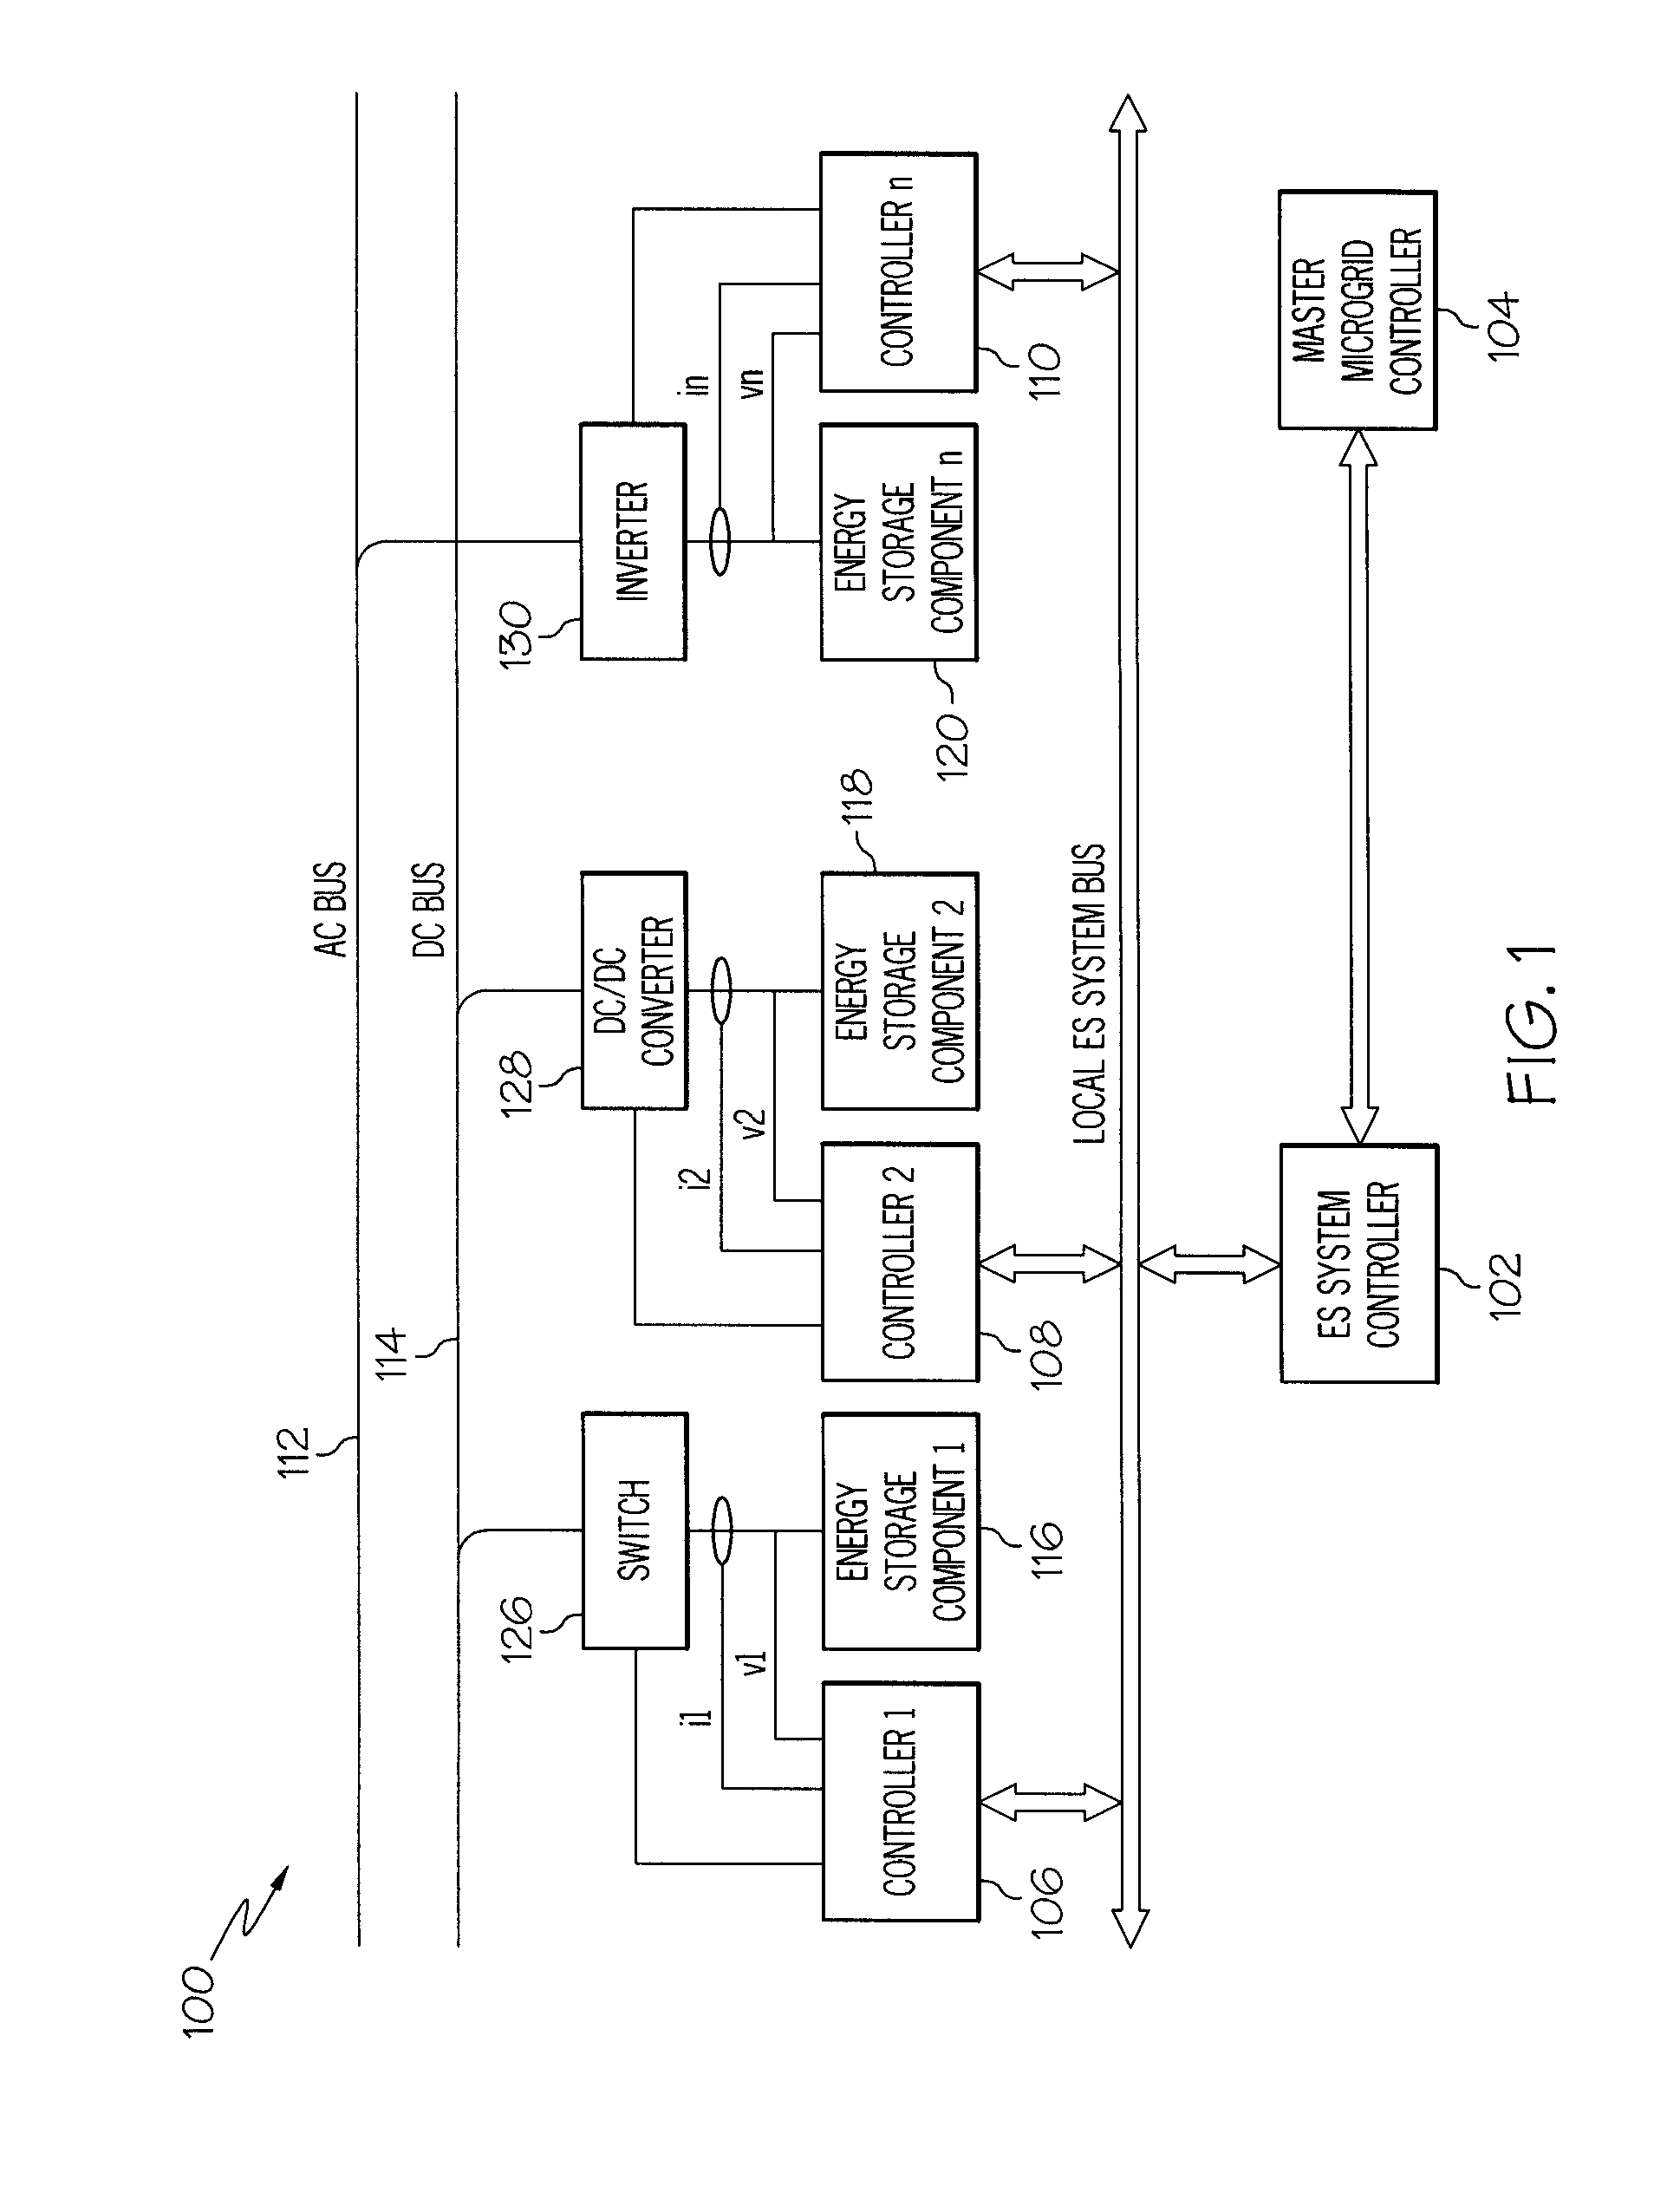 Method and apparatus for effective utilization of energy storage components within a microgid